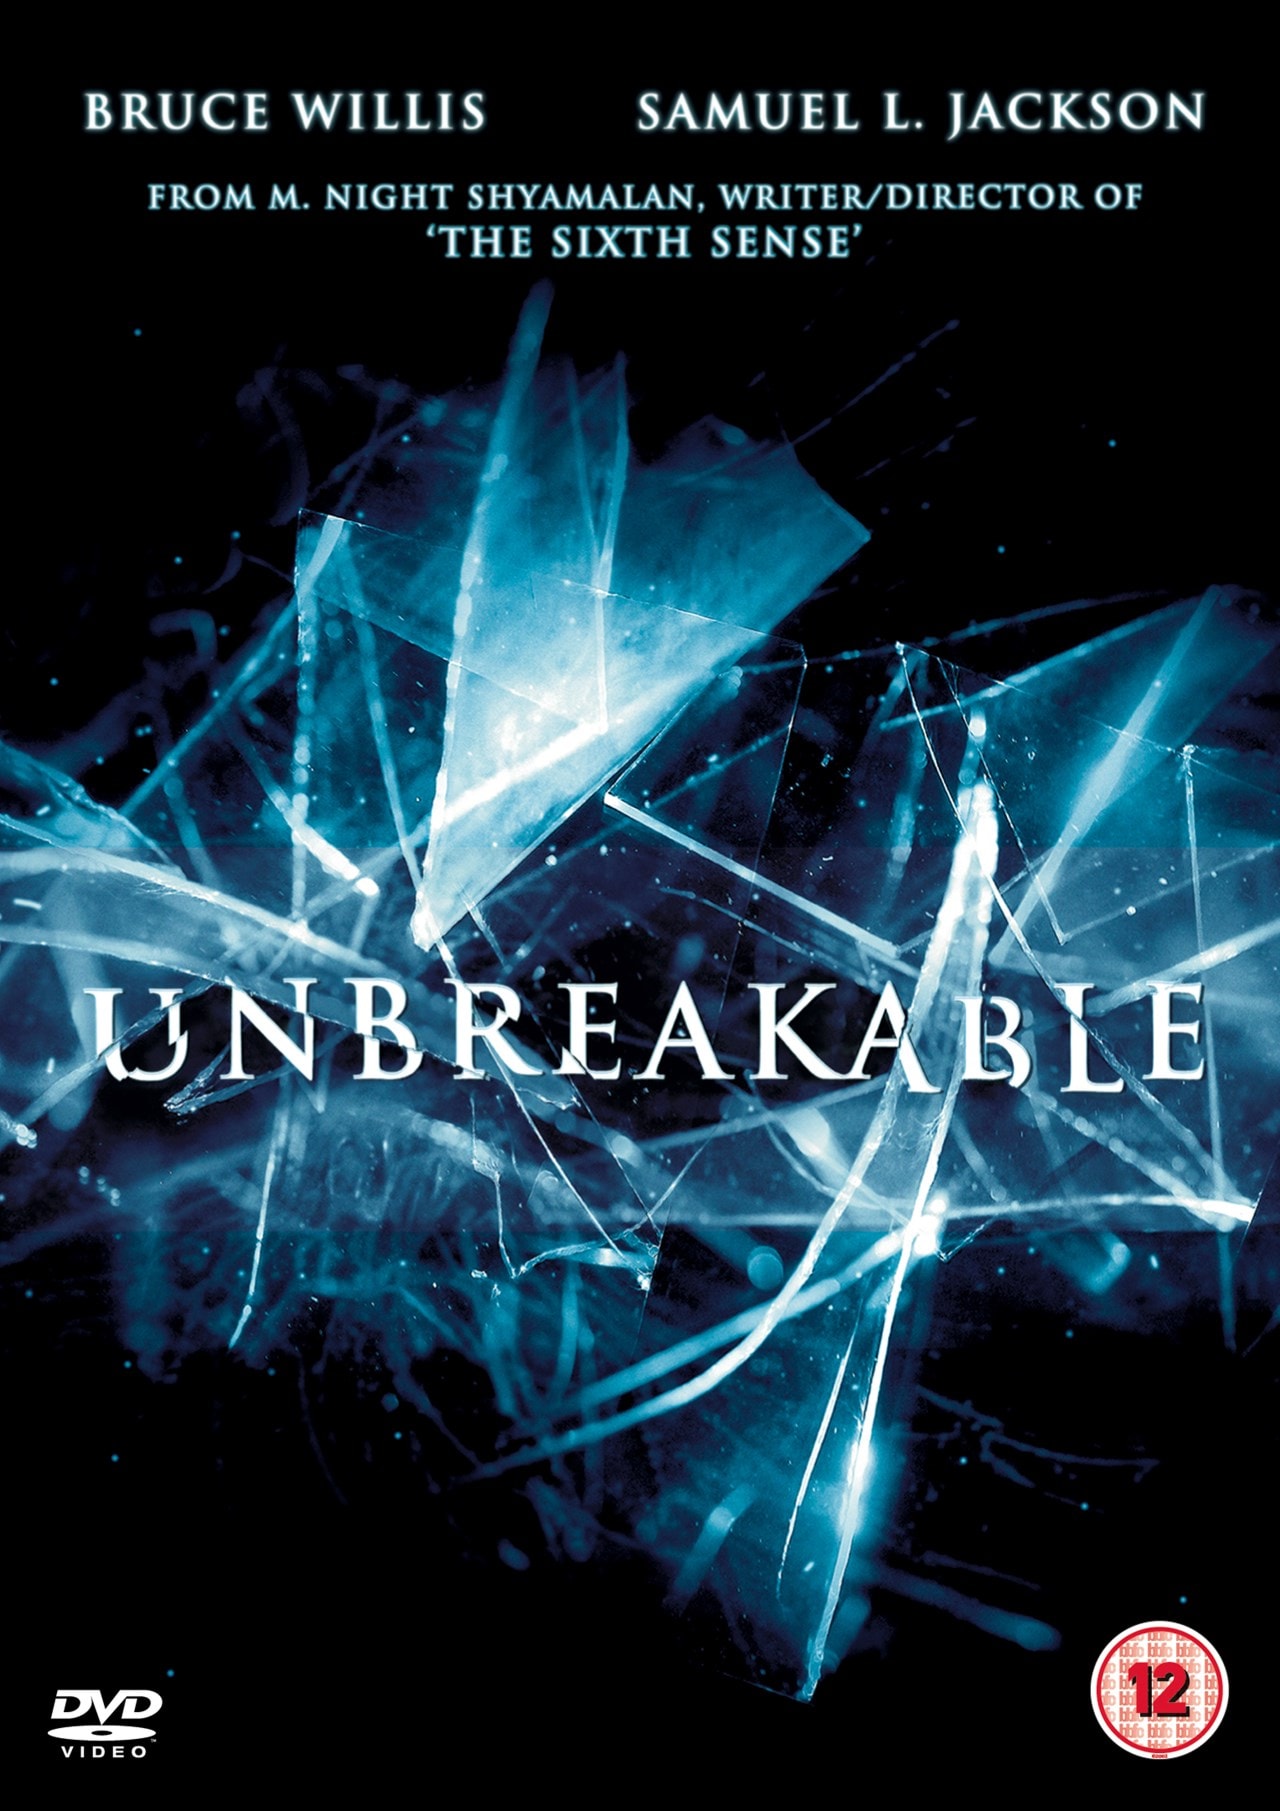 Unbreakable | DVD | Free shipping over £20 | HMV Store